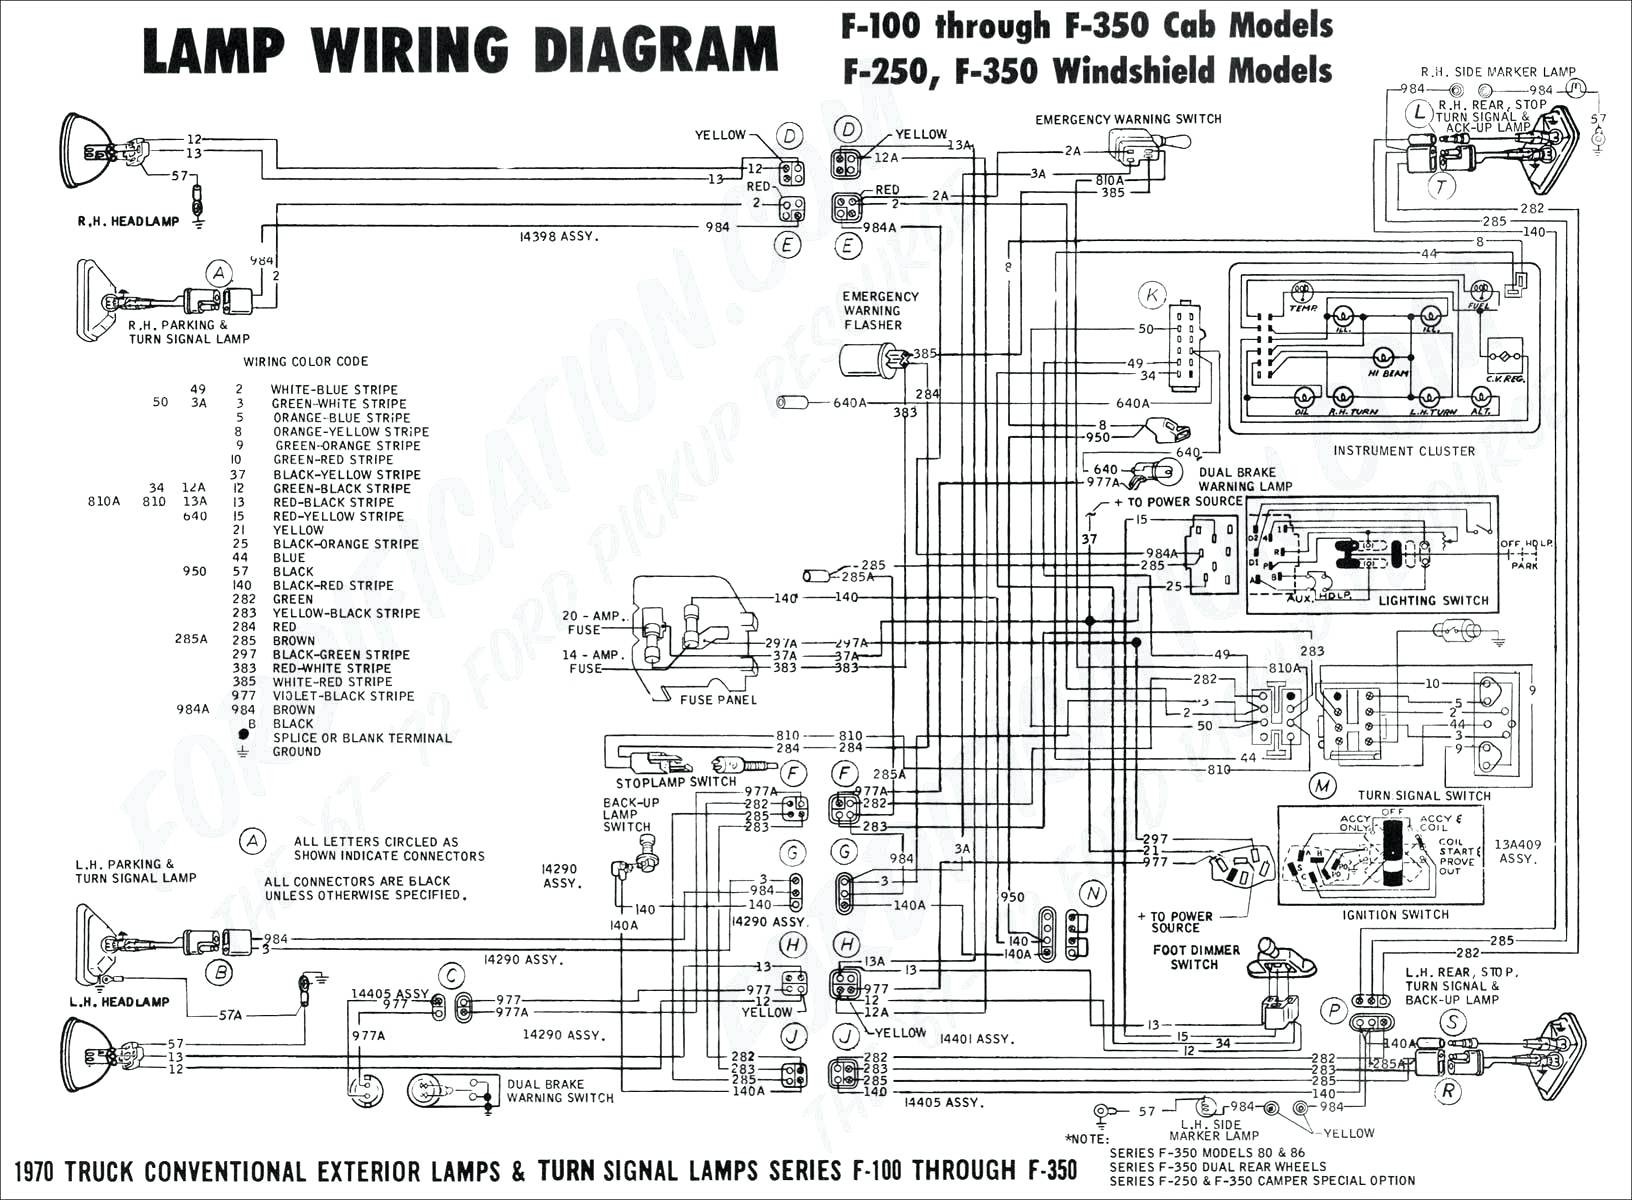 relay over freesammy sosa contactor wiring diagram of a contactor rh linewired co